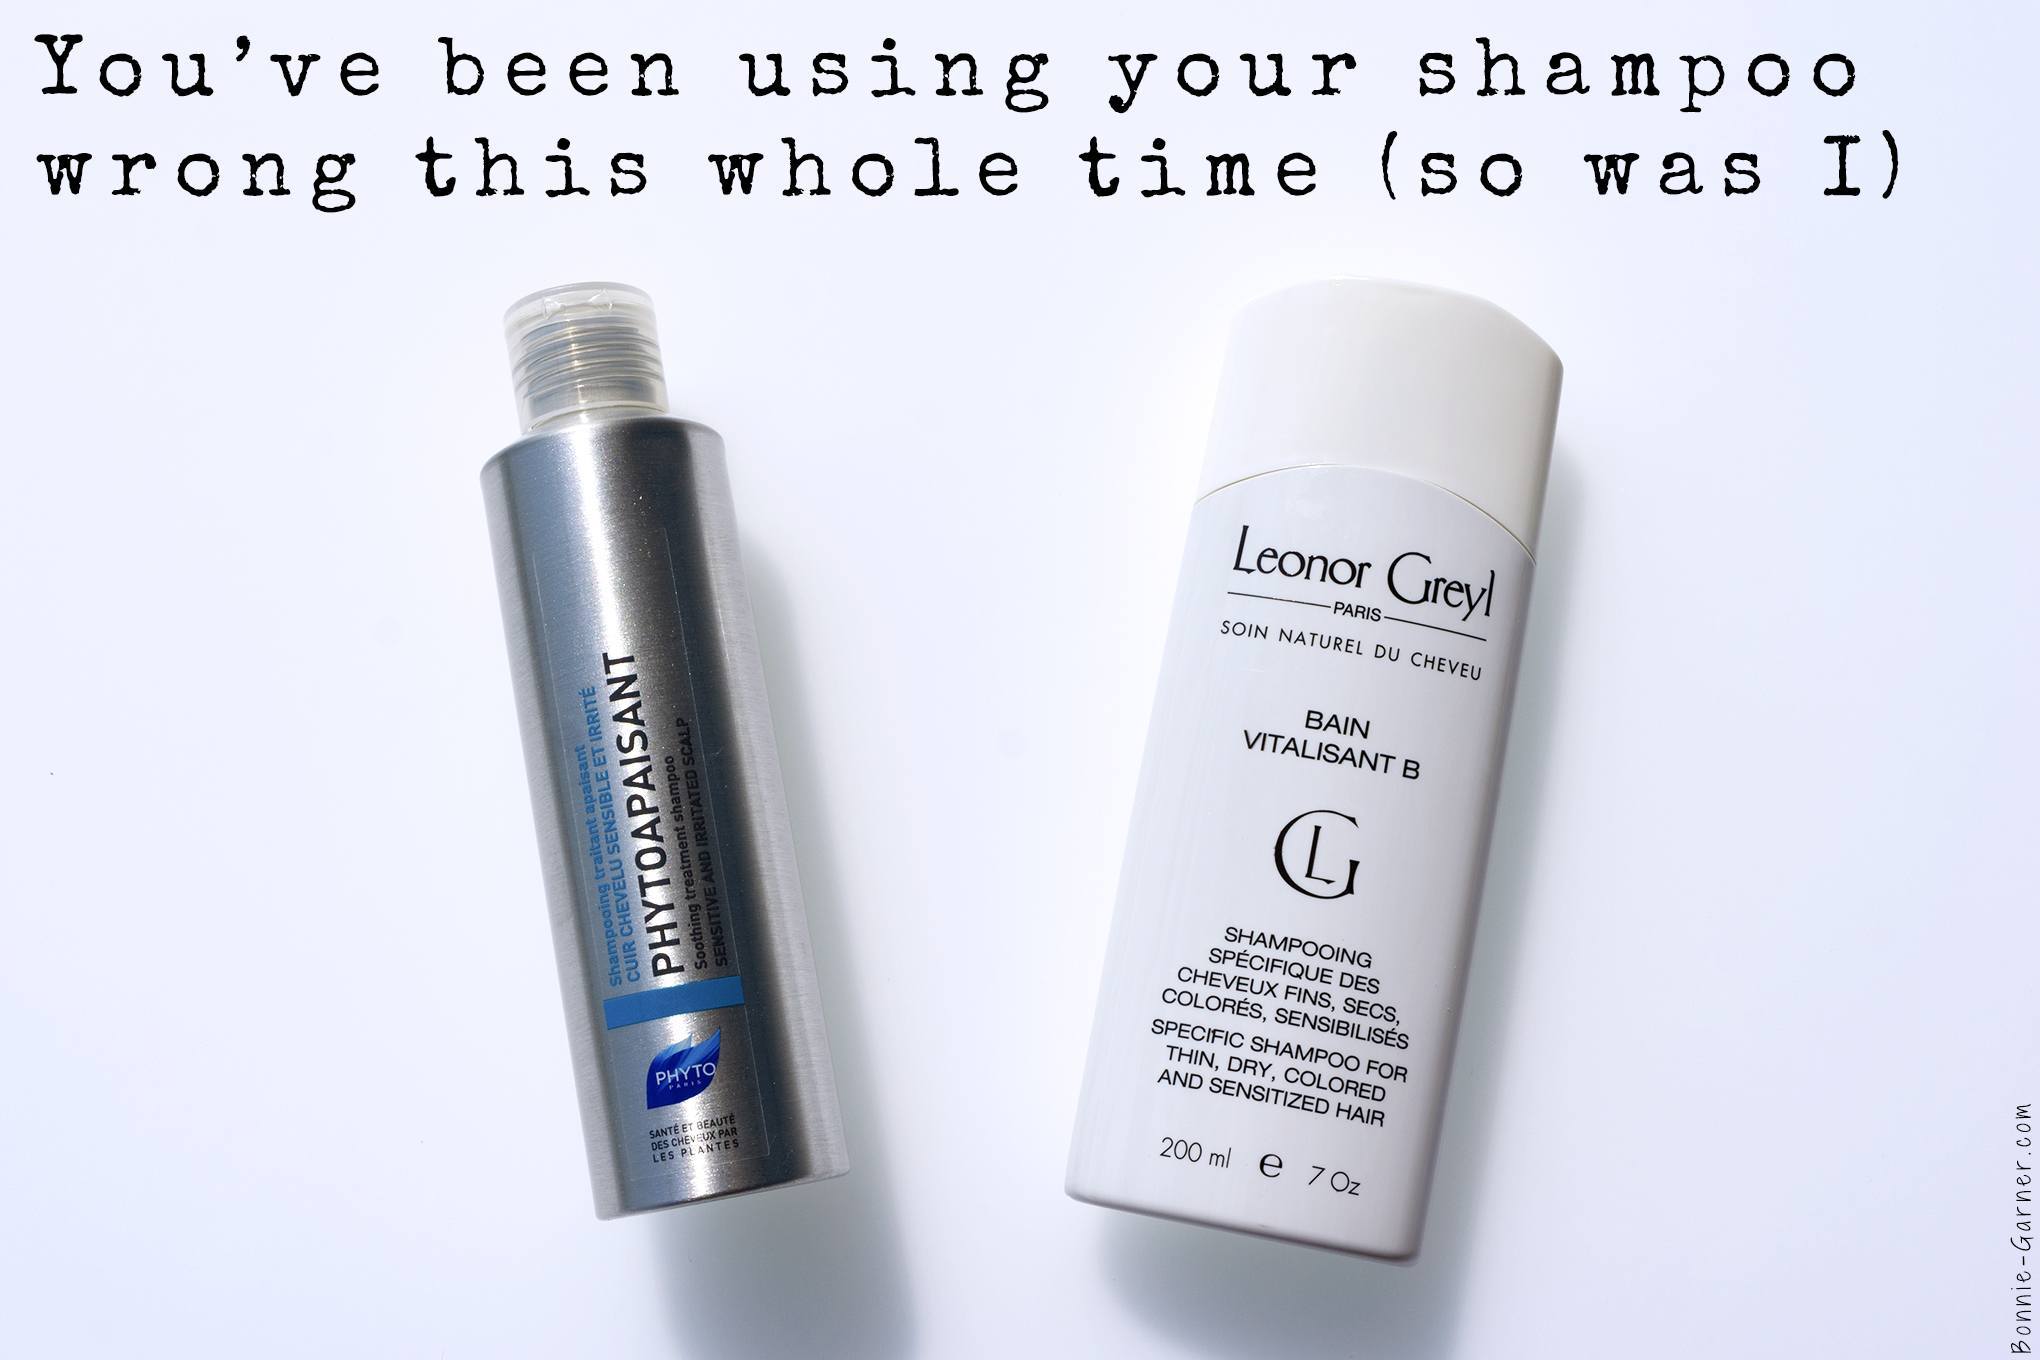 You’ve been using your shampoo wrong this whole time (so was I)